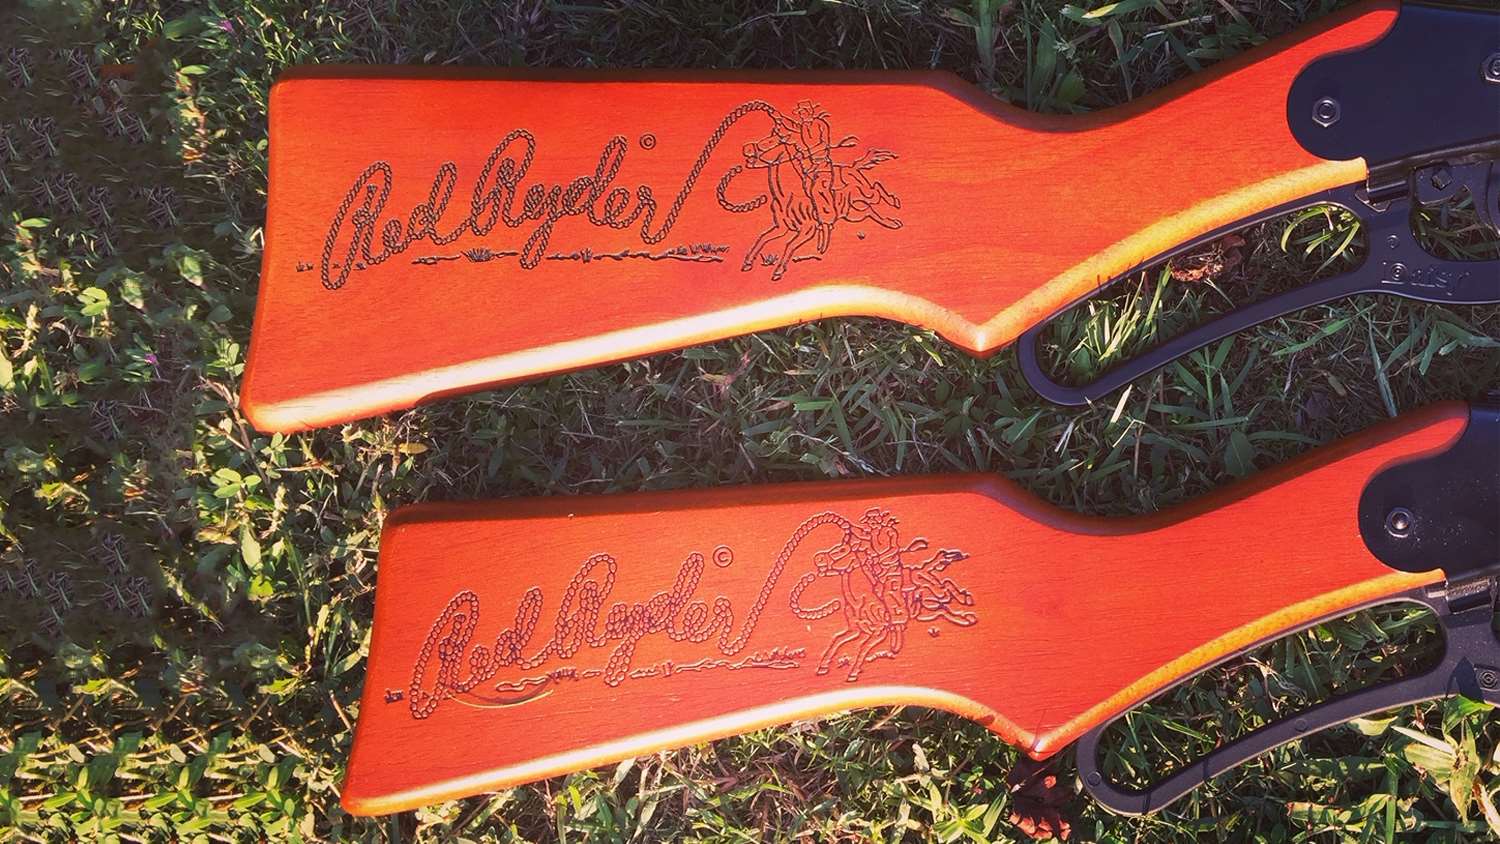 Adult and Junior Red Ryder BB Gun stocks